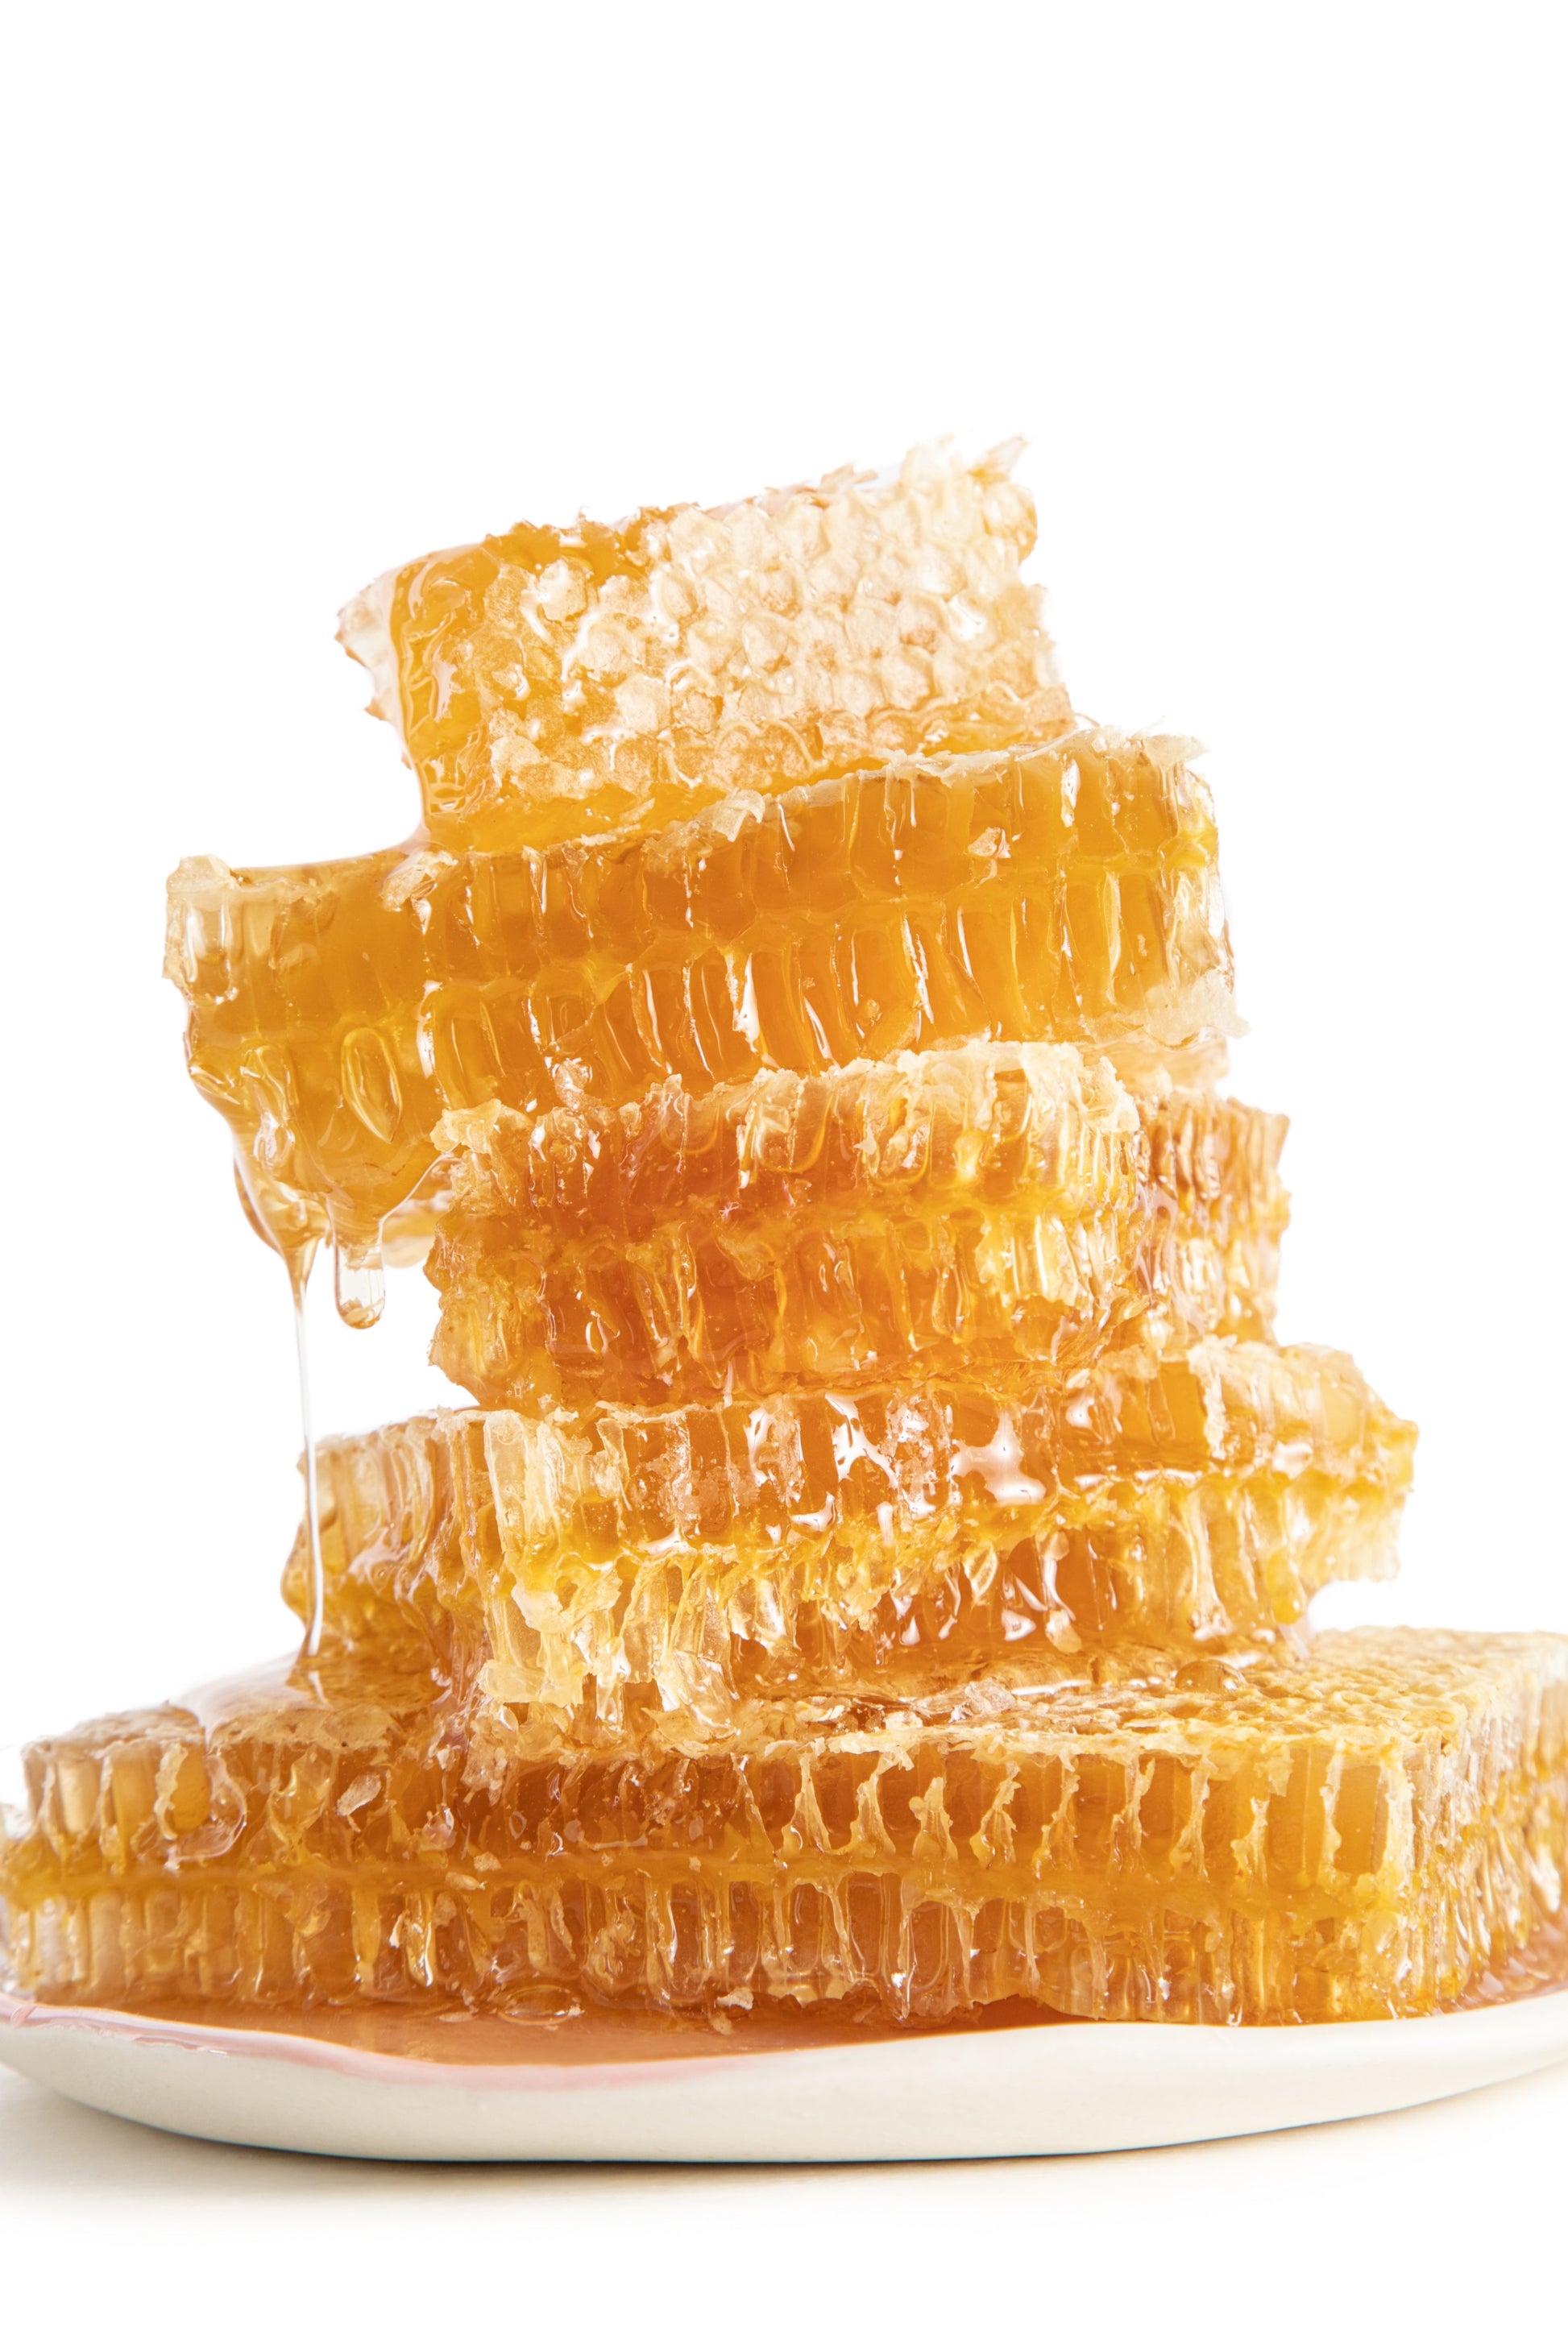 How To Make Honeycomb - The Loopy Whisk